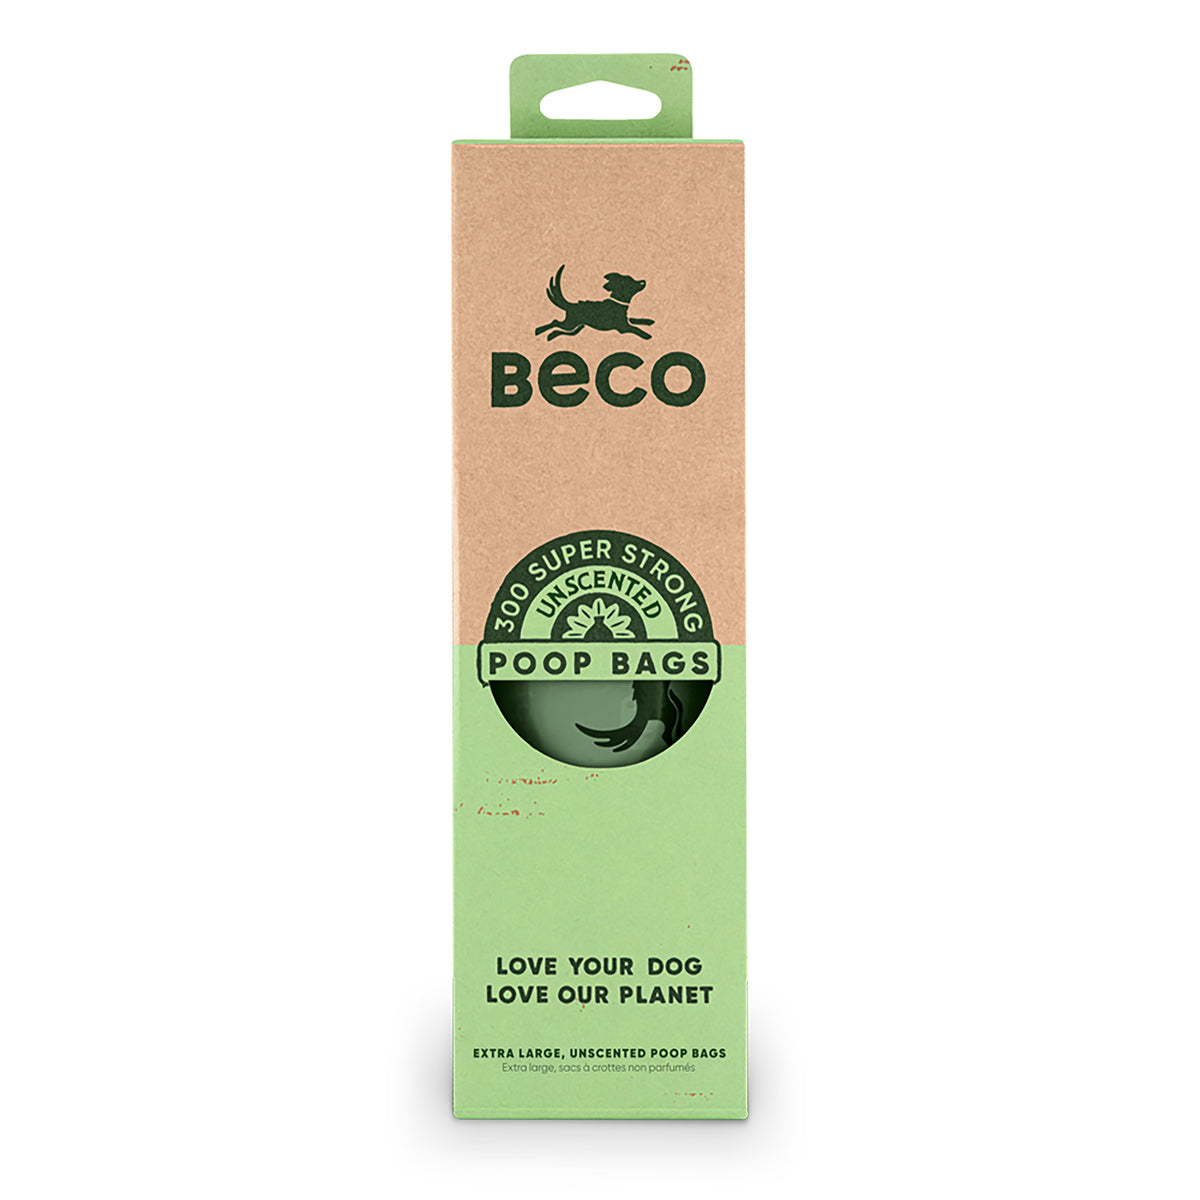 Beco Large Unscented Poop Bags (300 bags)